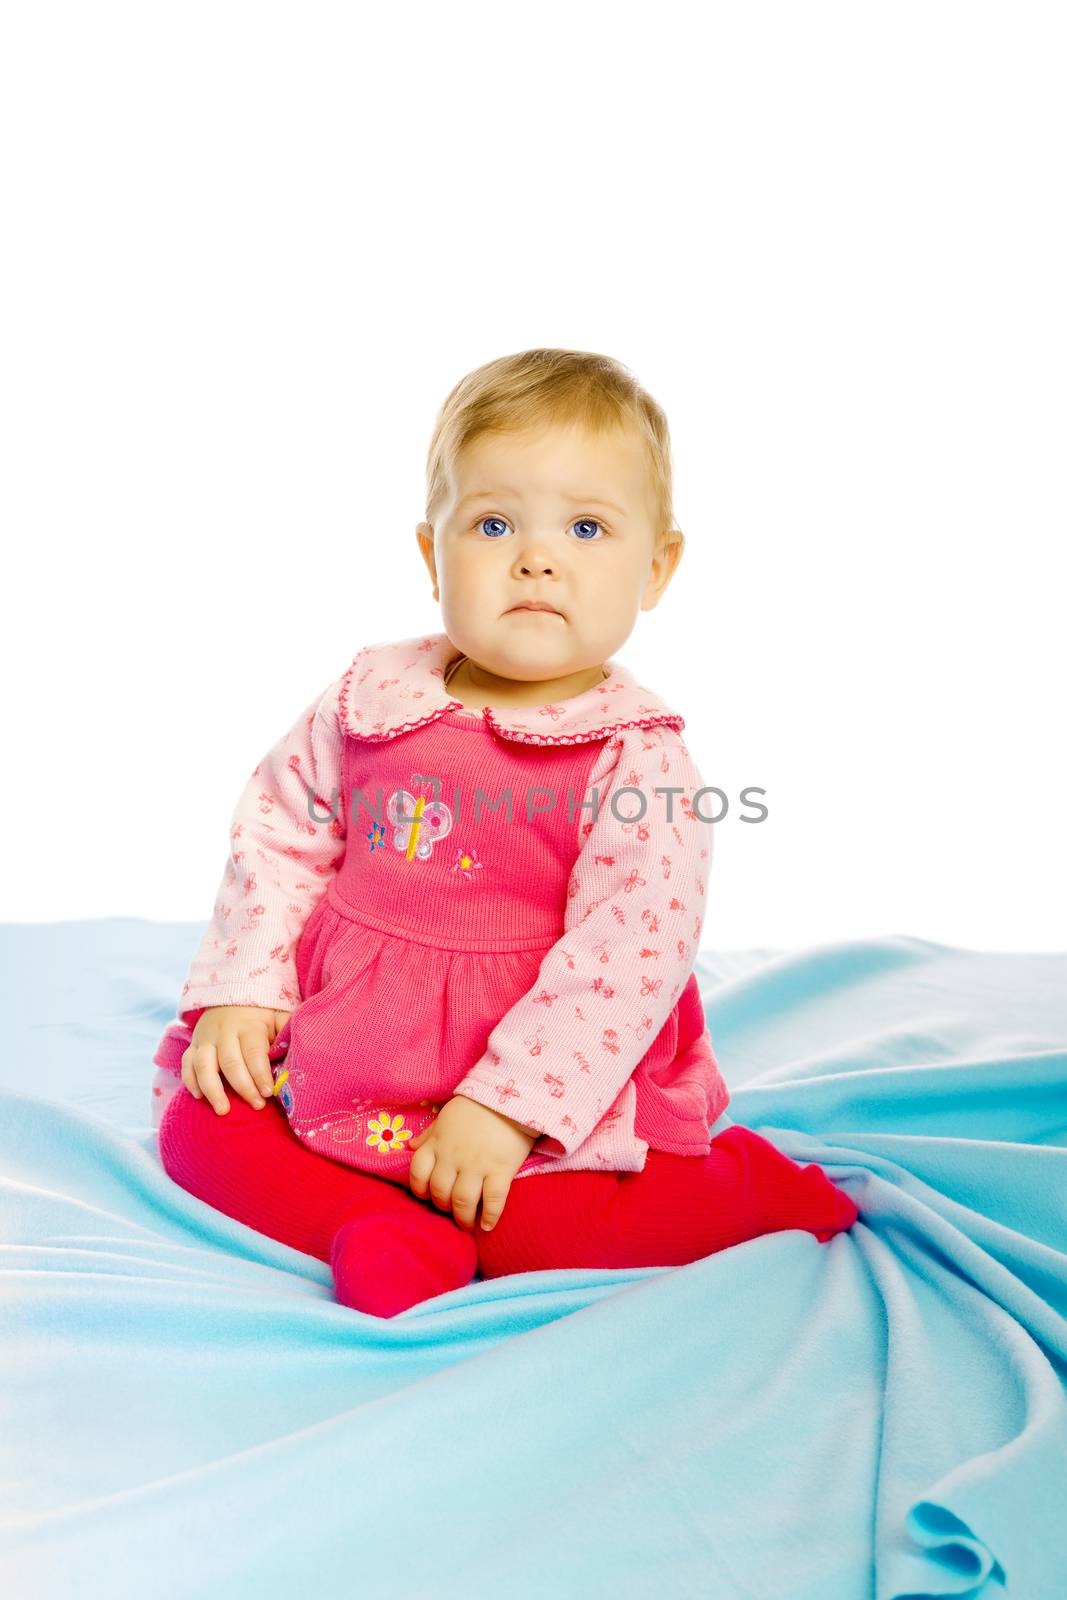 Little girl baby in a dress sitting on the floor